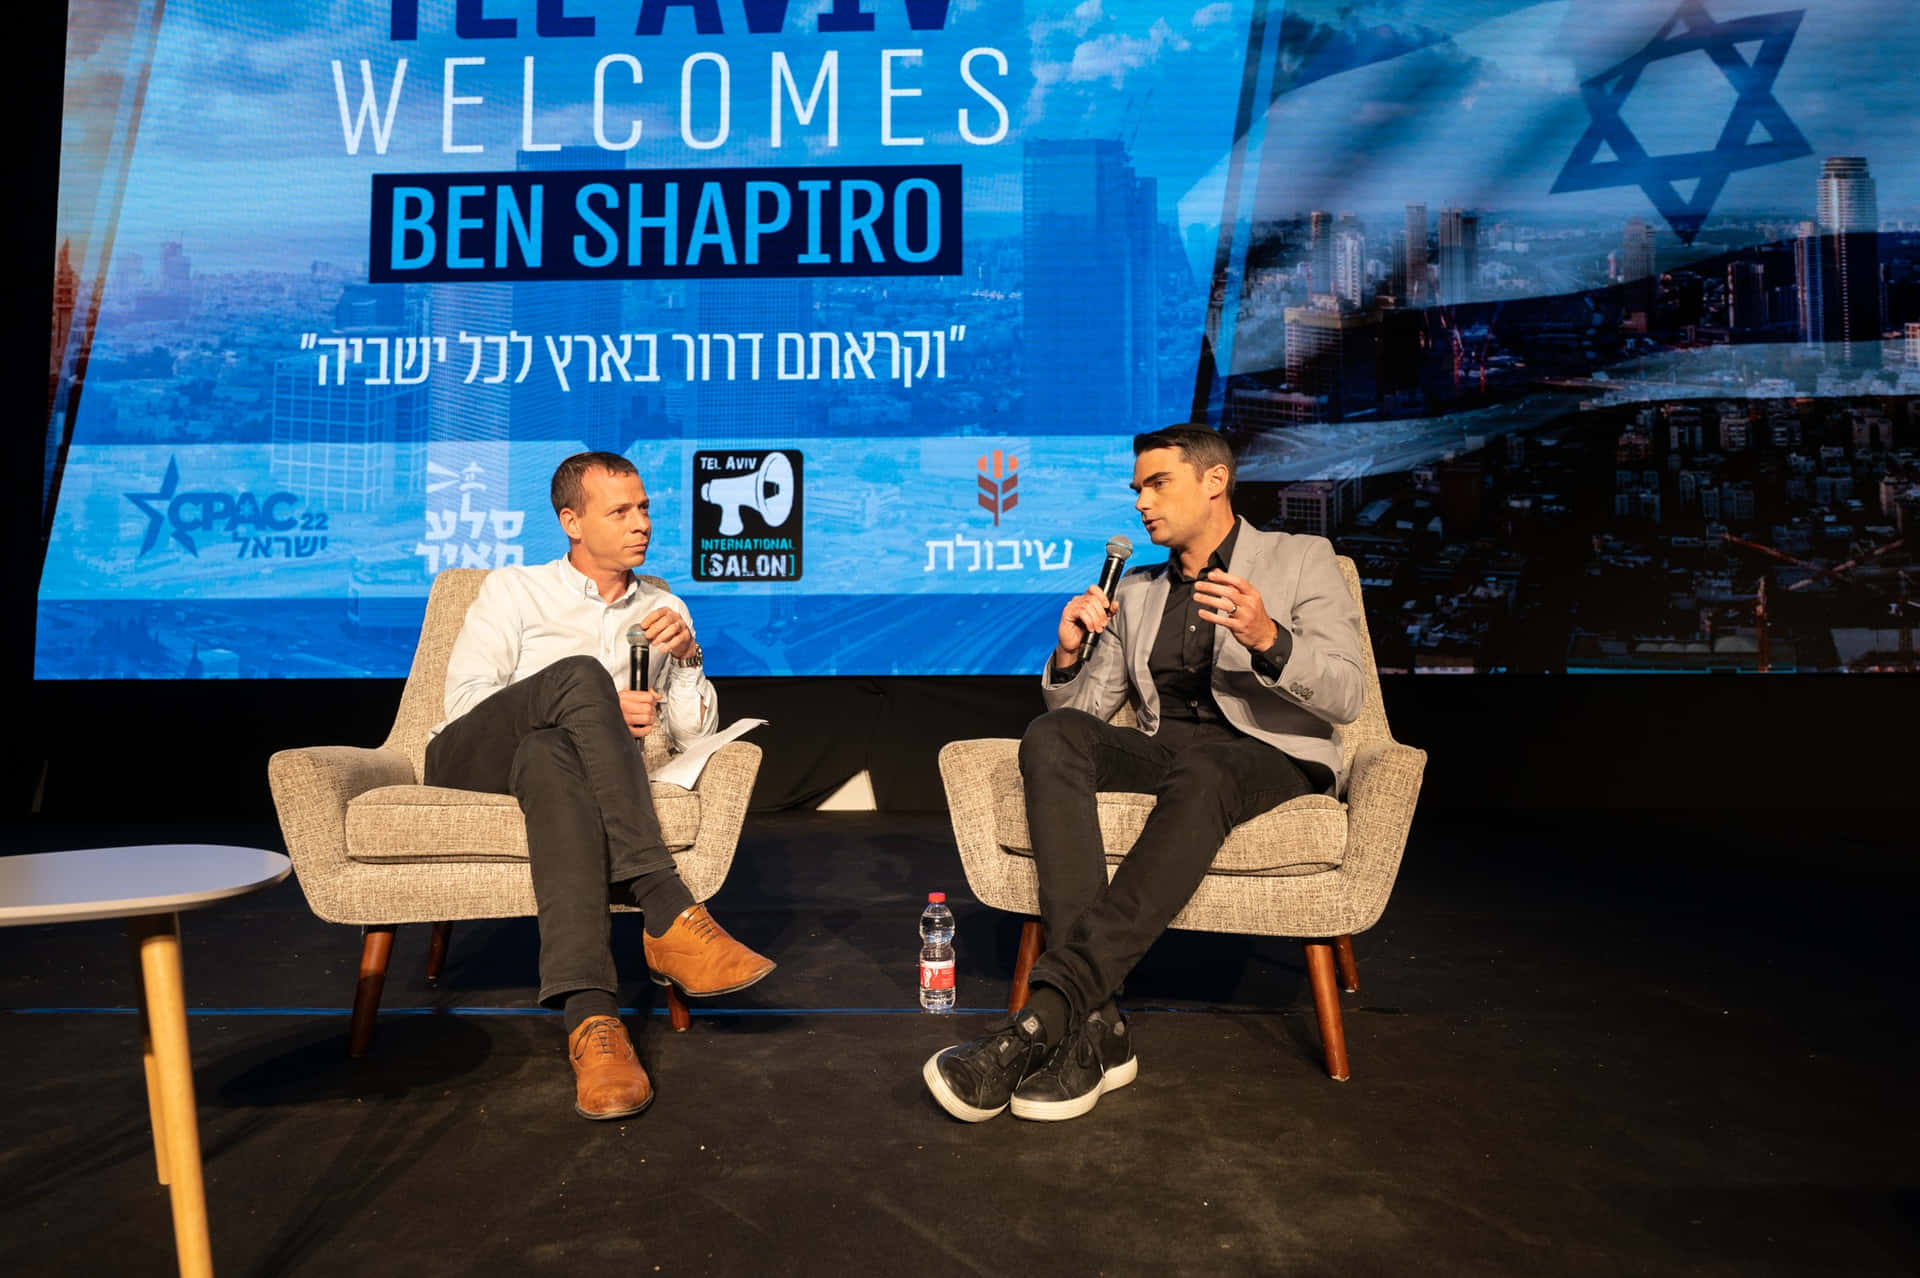 Ben Shapiro is an American author and podcast host, who has become an influential voice in conservative and right-wing circles.